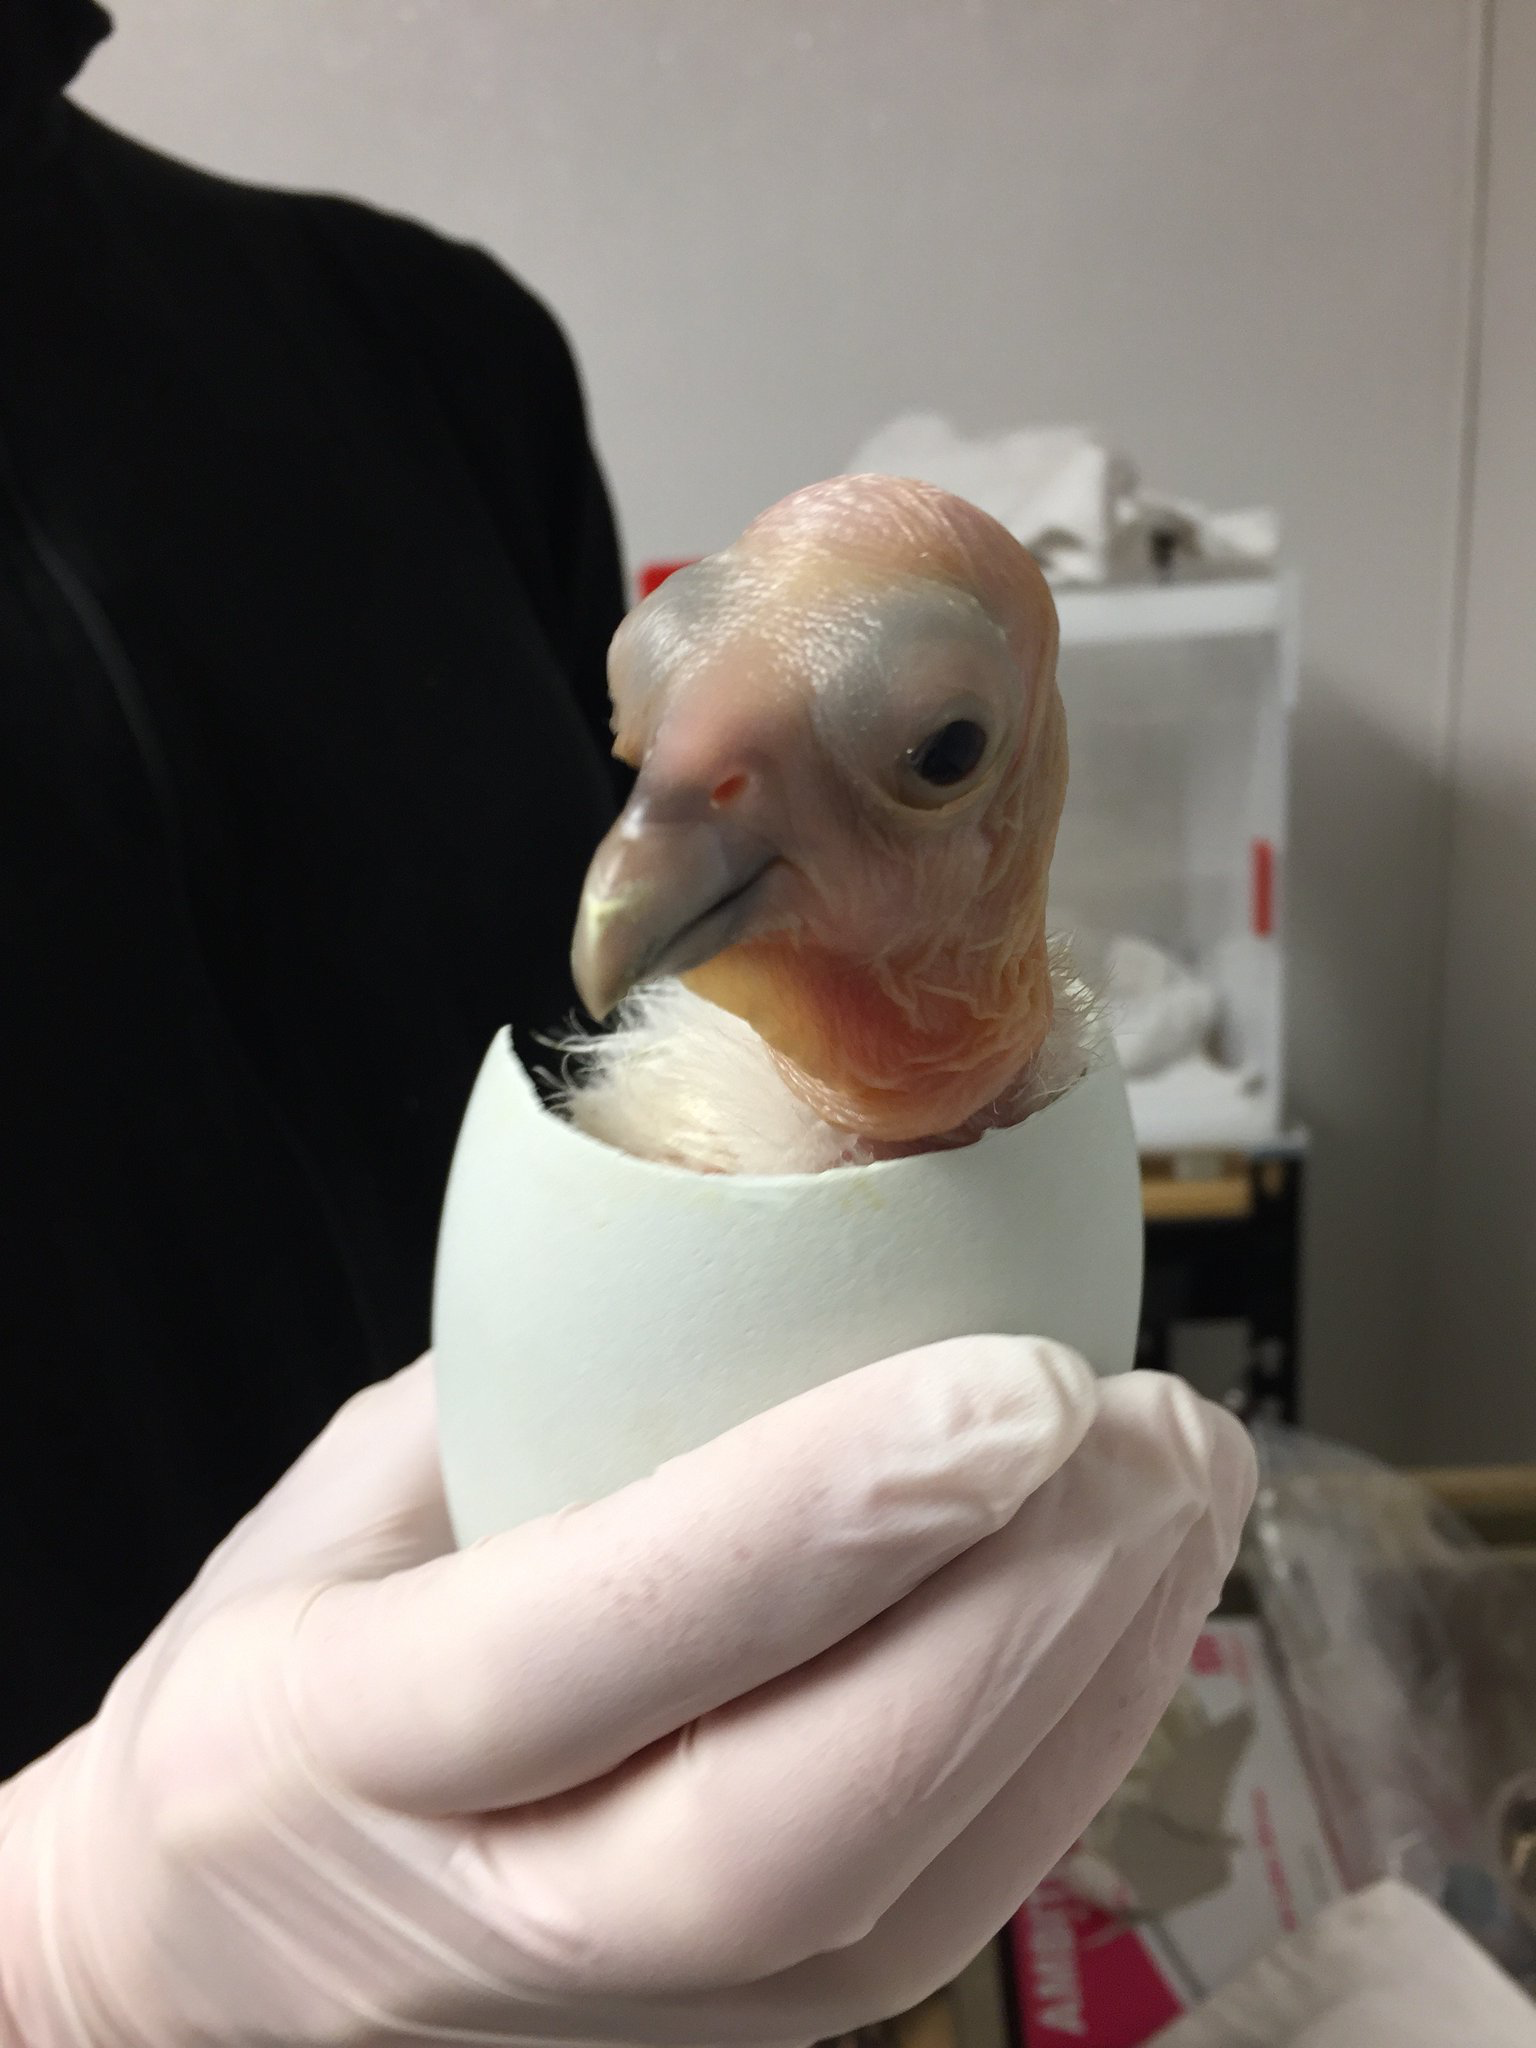 California condor chick hatched at the Oregon Zoo